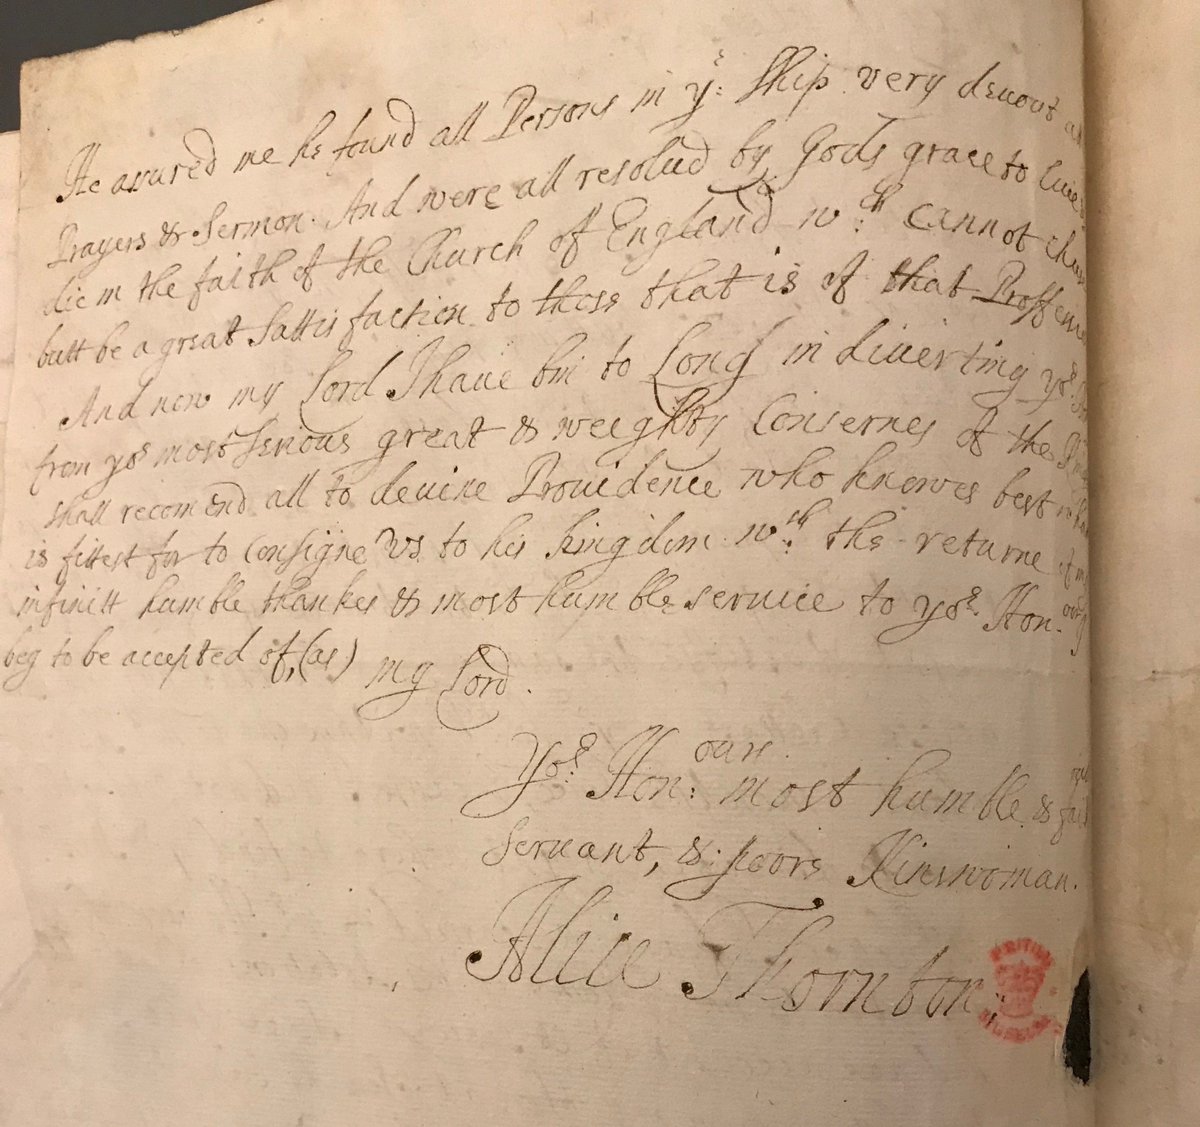 ⚓️It's 1689 when Alice Thornton writes this letter to her cousin, Lord Danby. He has helped get her son, Robert, on a ship to Spain and she thanks him for 'putting him... so far away'. Robert was much in debt at the time. This fascinating record is at @BL_ModernMSS #EYASecrets